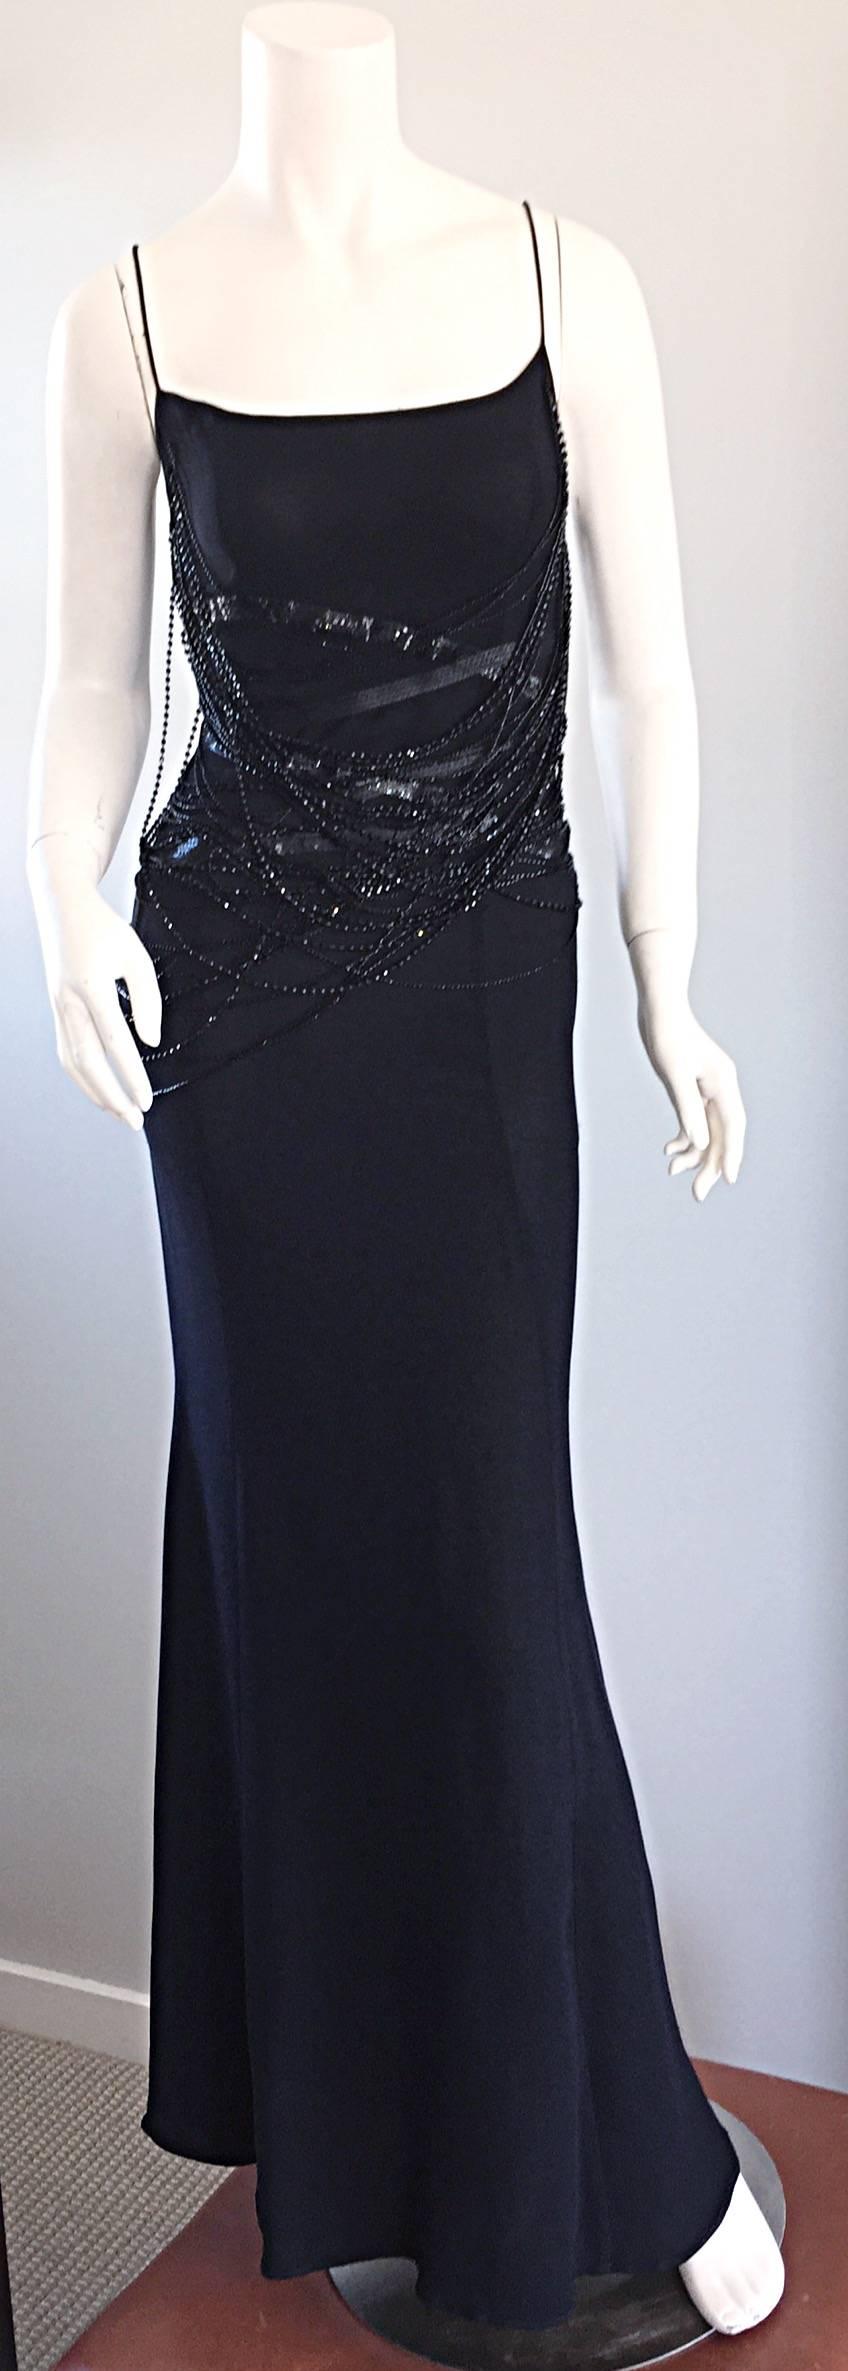 Beautiful, unique, and OH SO FLATTERING! Gai Mattiolo Couture black silk gown! Dozens of strands of beads that drape across the front and back, that form a 'Spiderweb' look! Looks fantastic on! In great condition, with minor wear to some